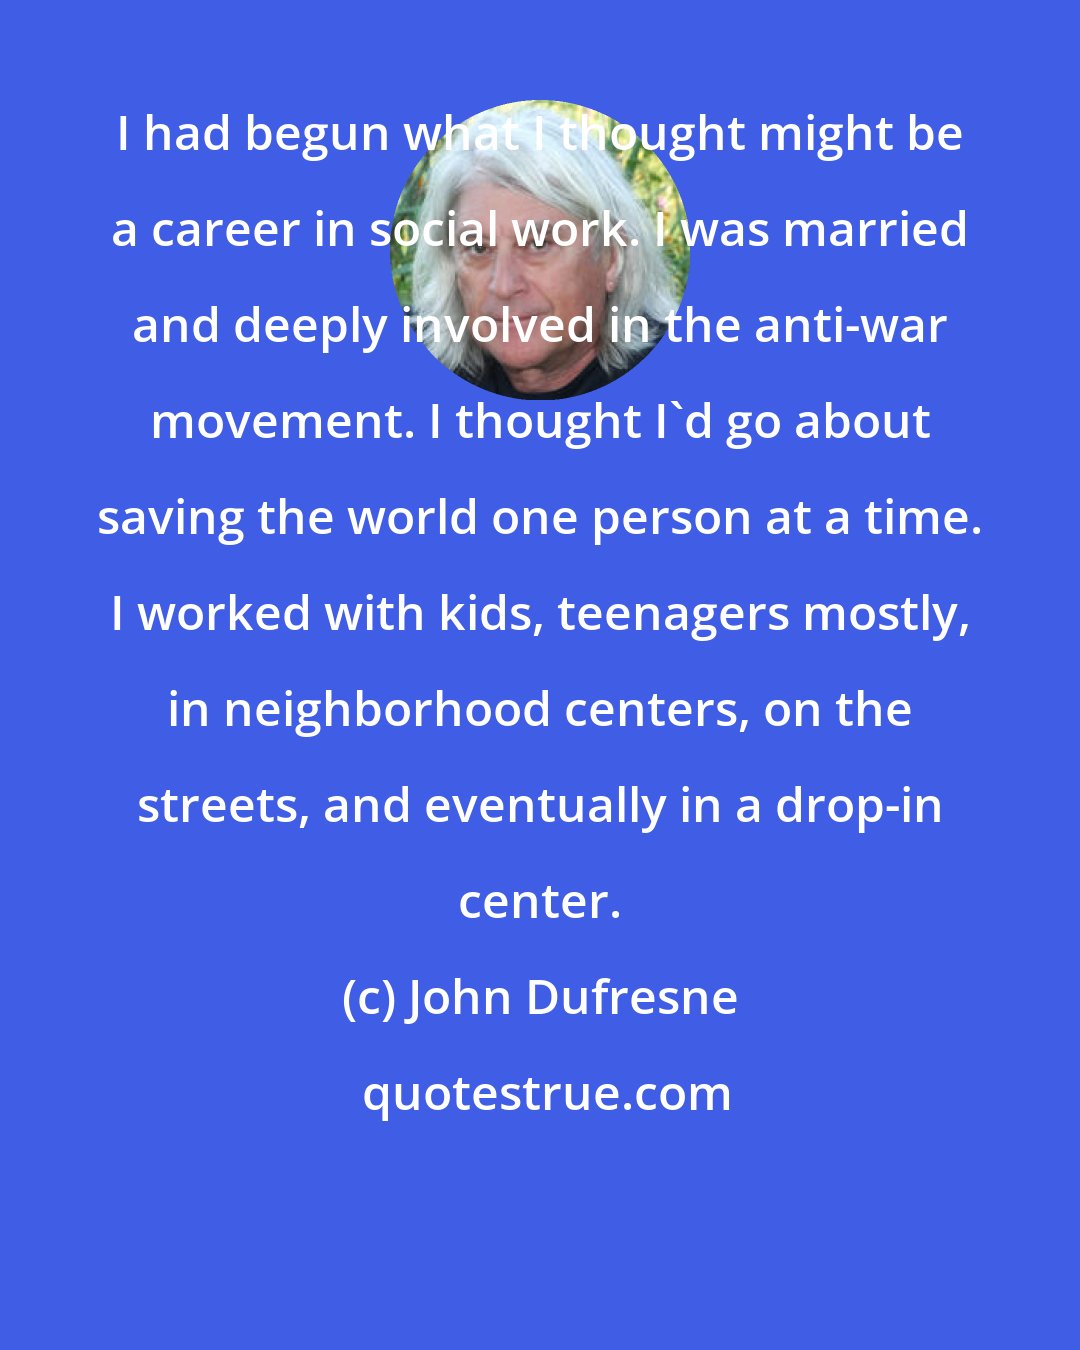 John Dufresne: I had begun what I thought might be a career in social work. I was married and deeply involved in the anti-war movement. I thought I'd go about saving the world one person at a time. I worked with kids, teenagers mostly, in neighborhood centers, on the streets, and eventually in a drop-in center.